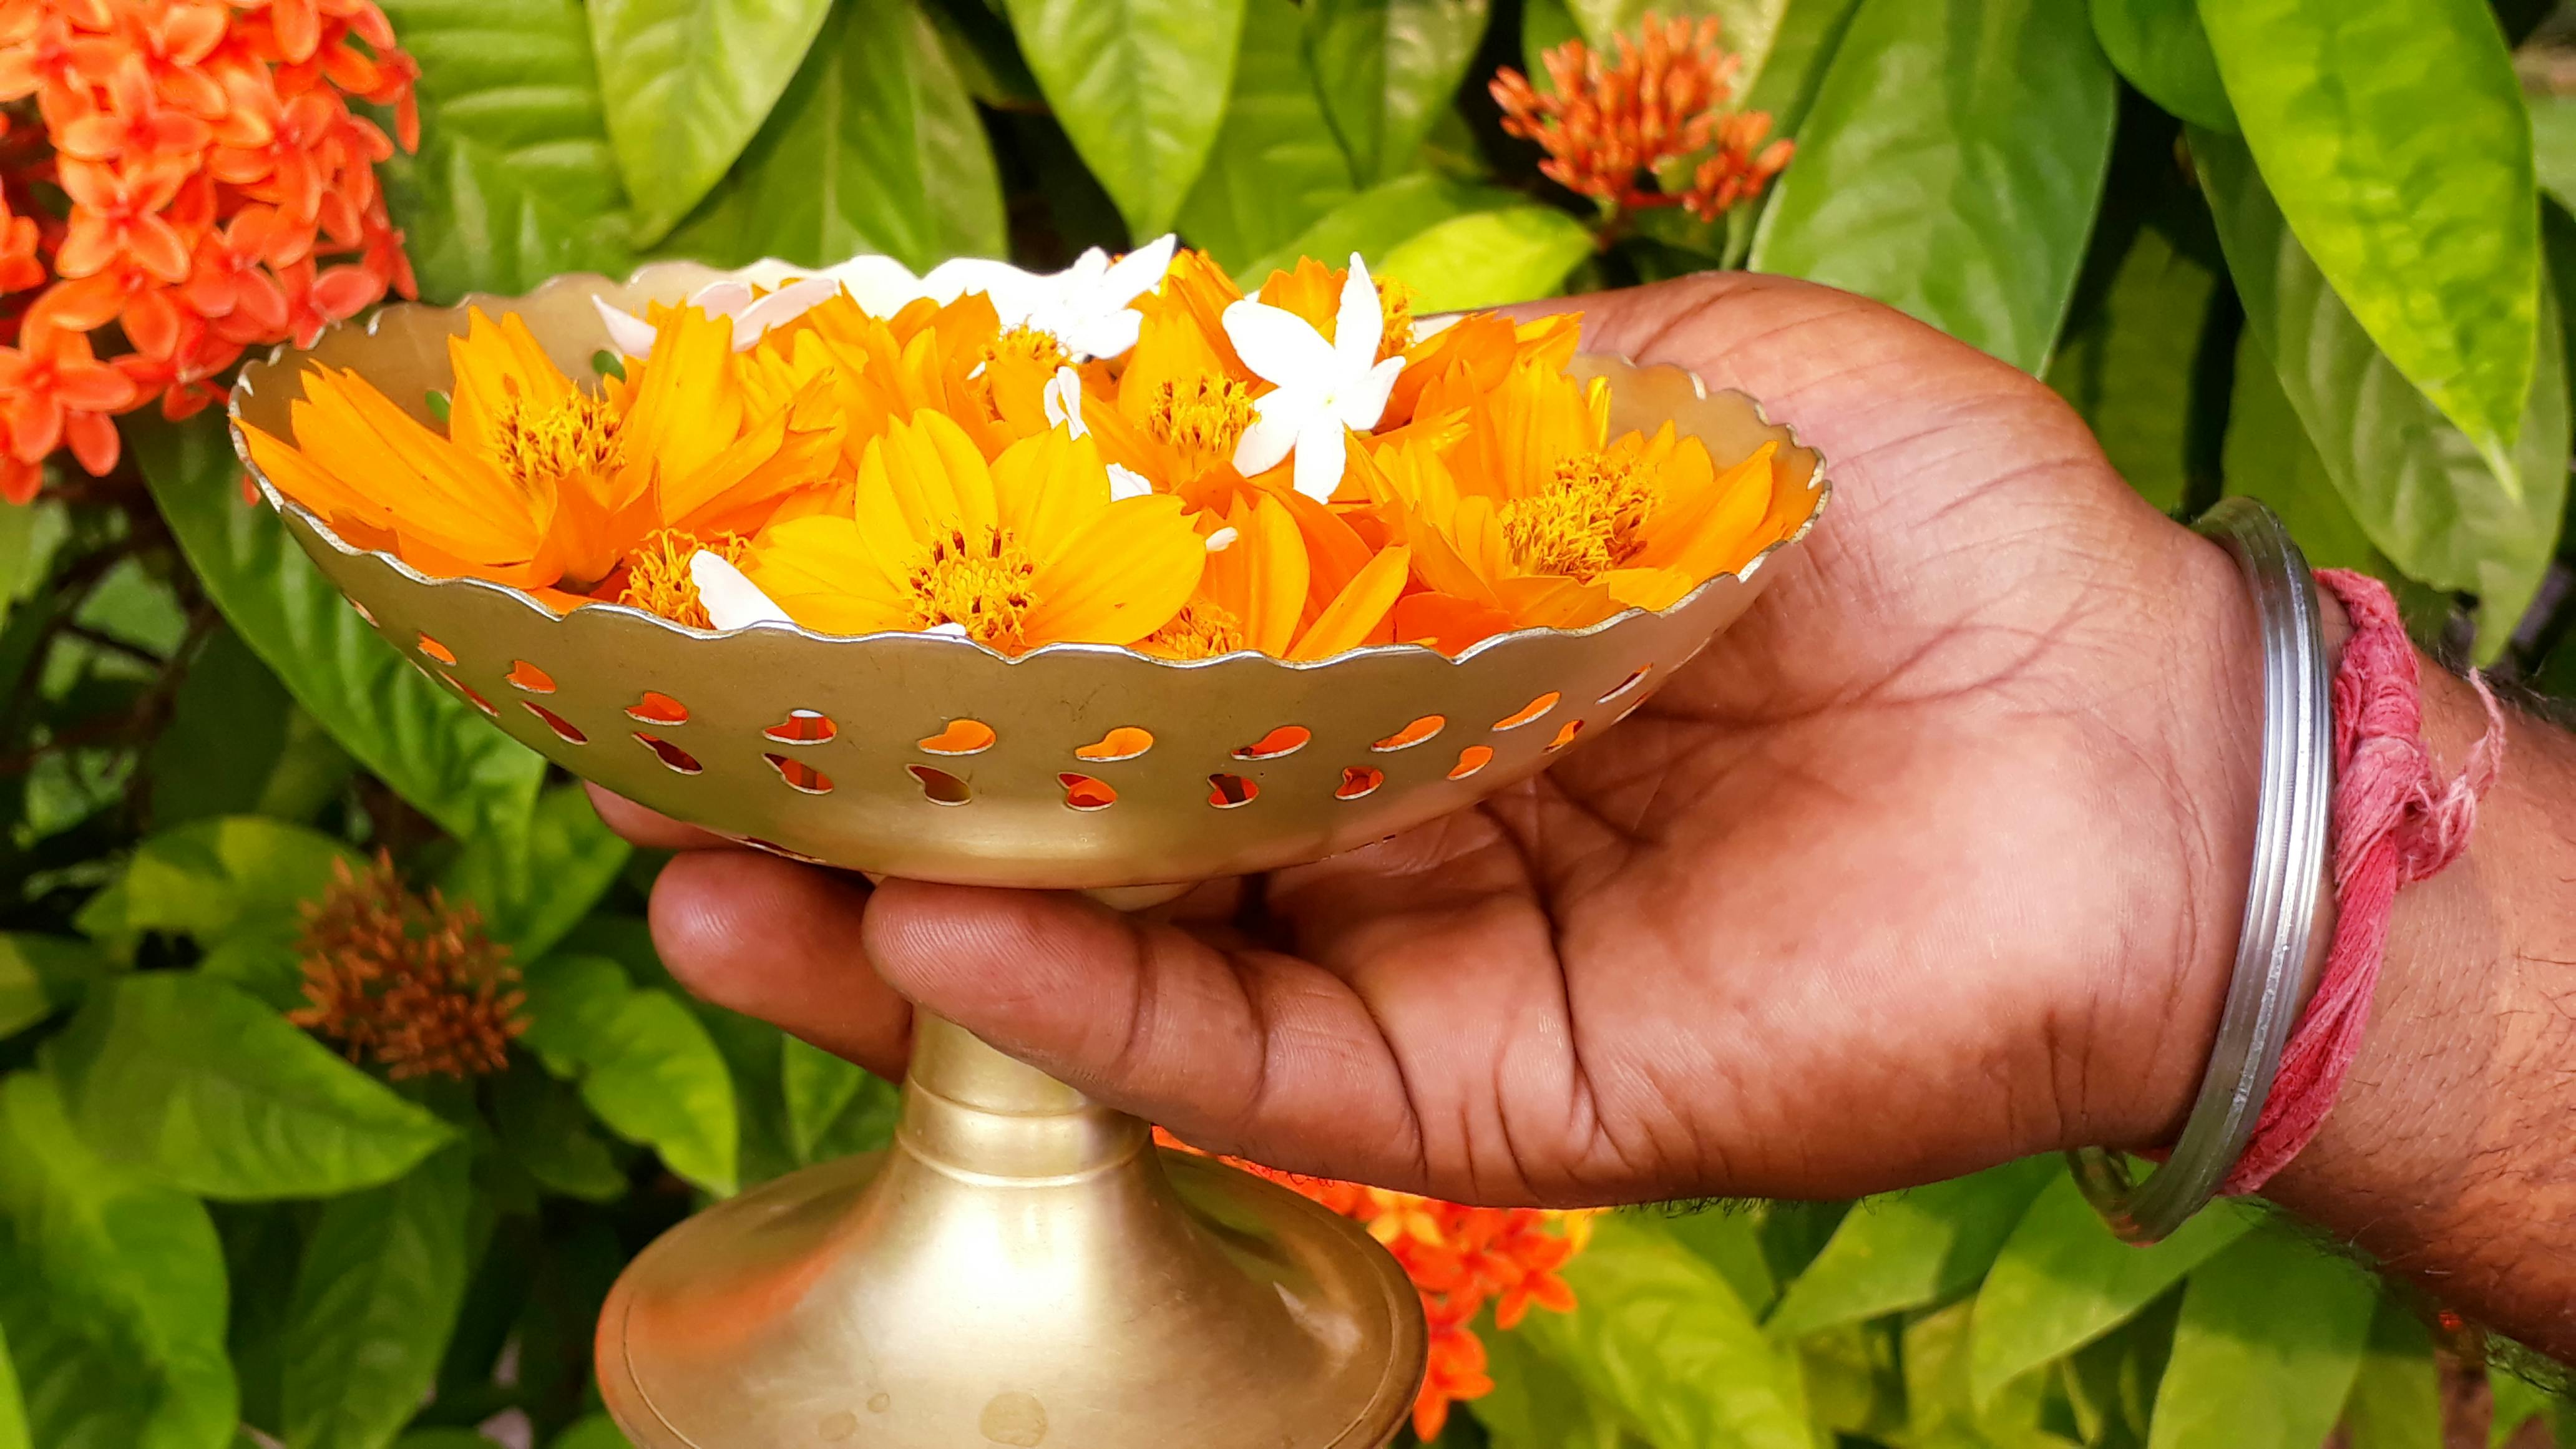 Free stock photo of flowers, flowers for worship, holding container of flowers